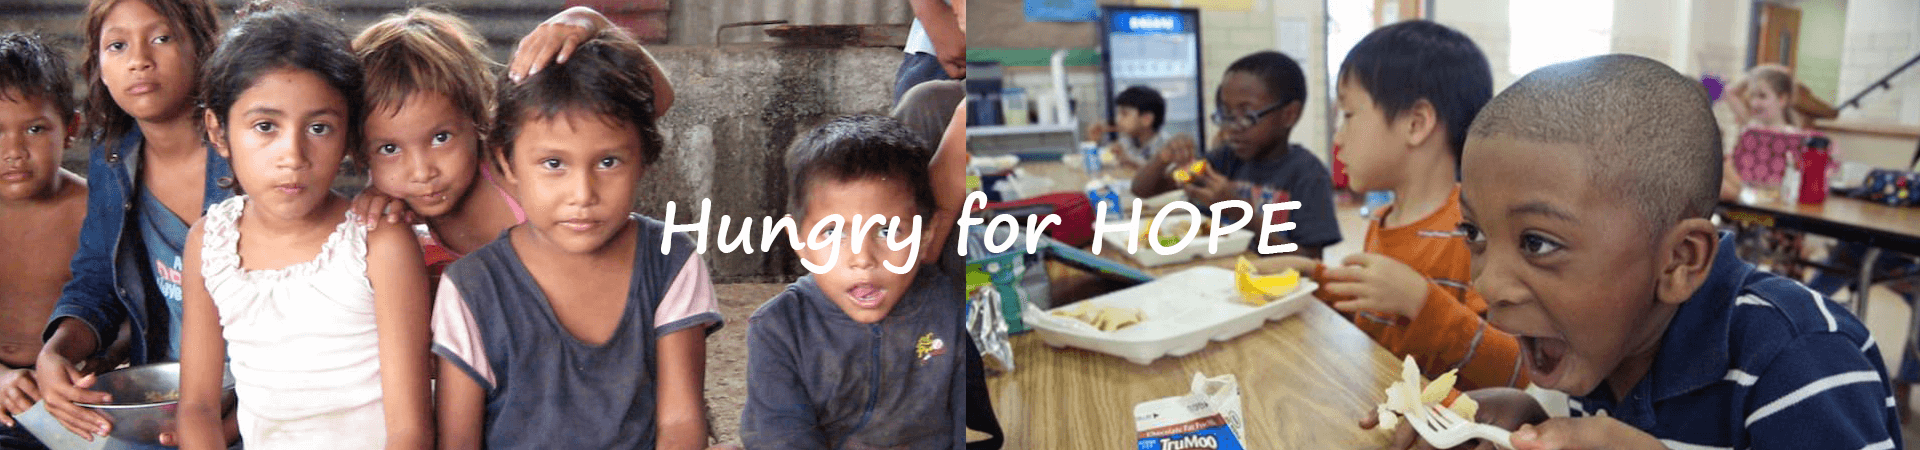 Hungry for HOPE